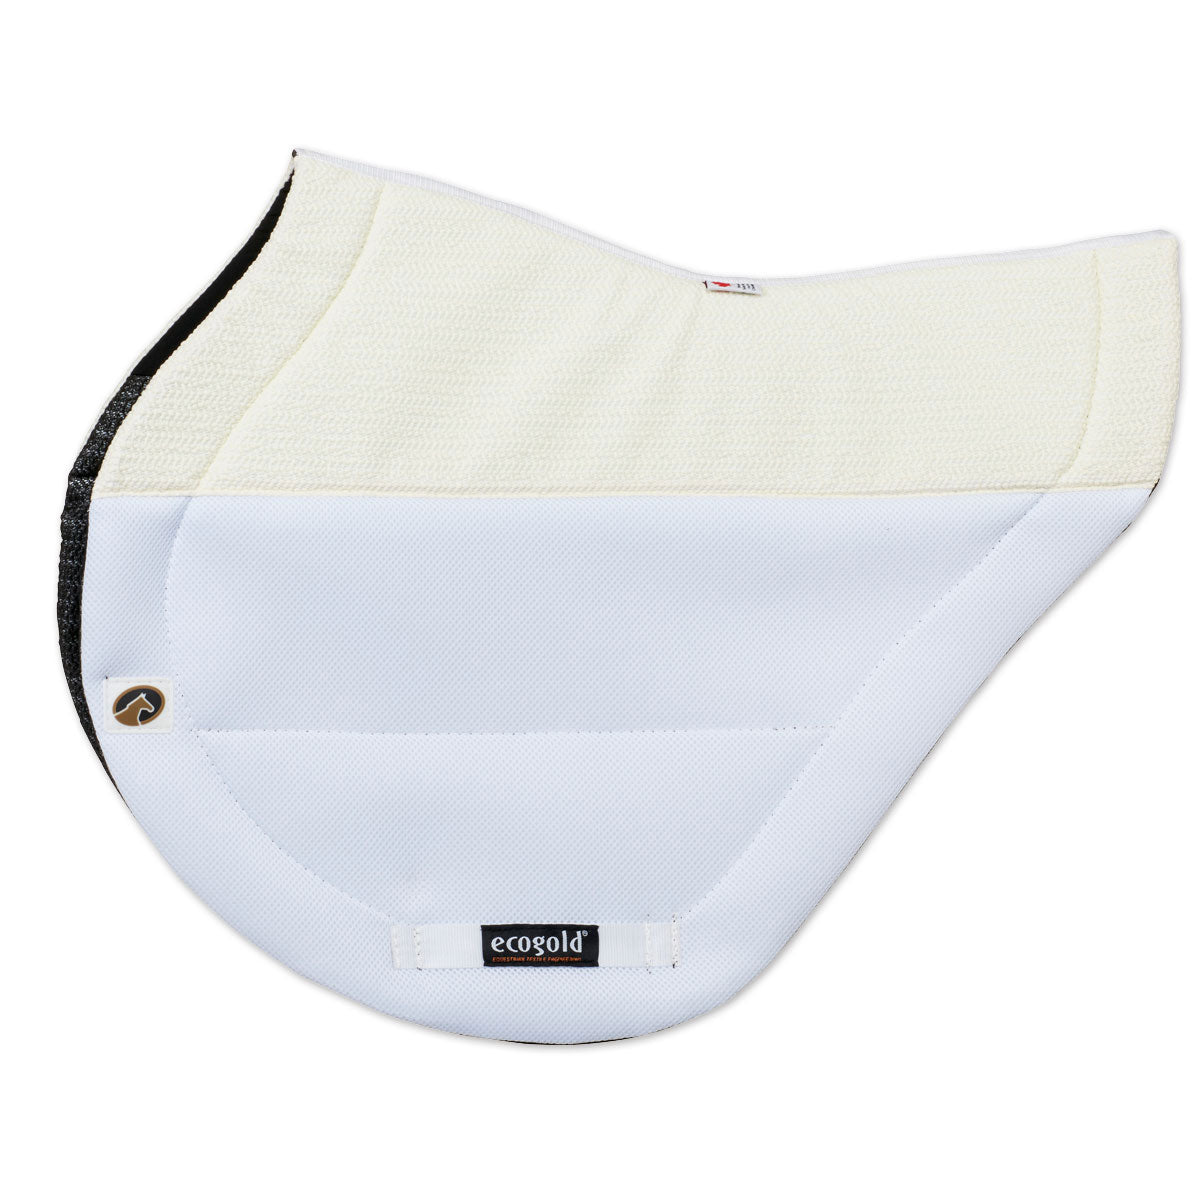 Ecogold Secure Cross Country Pad